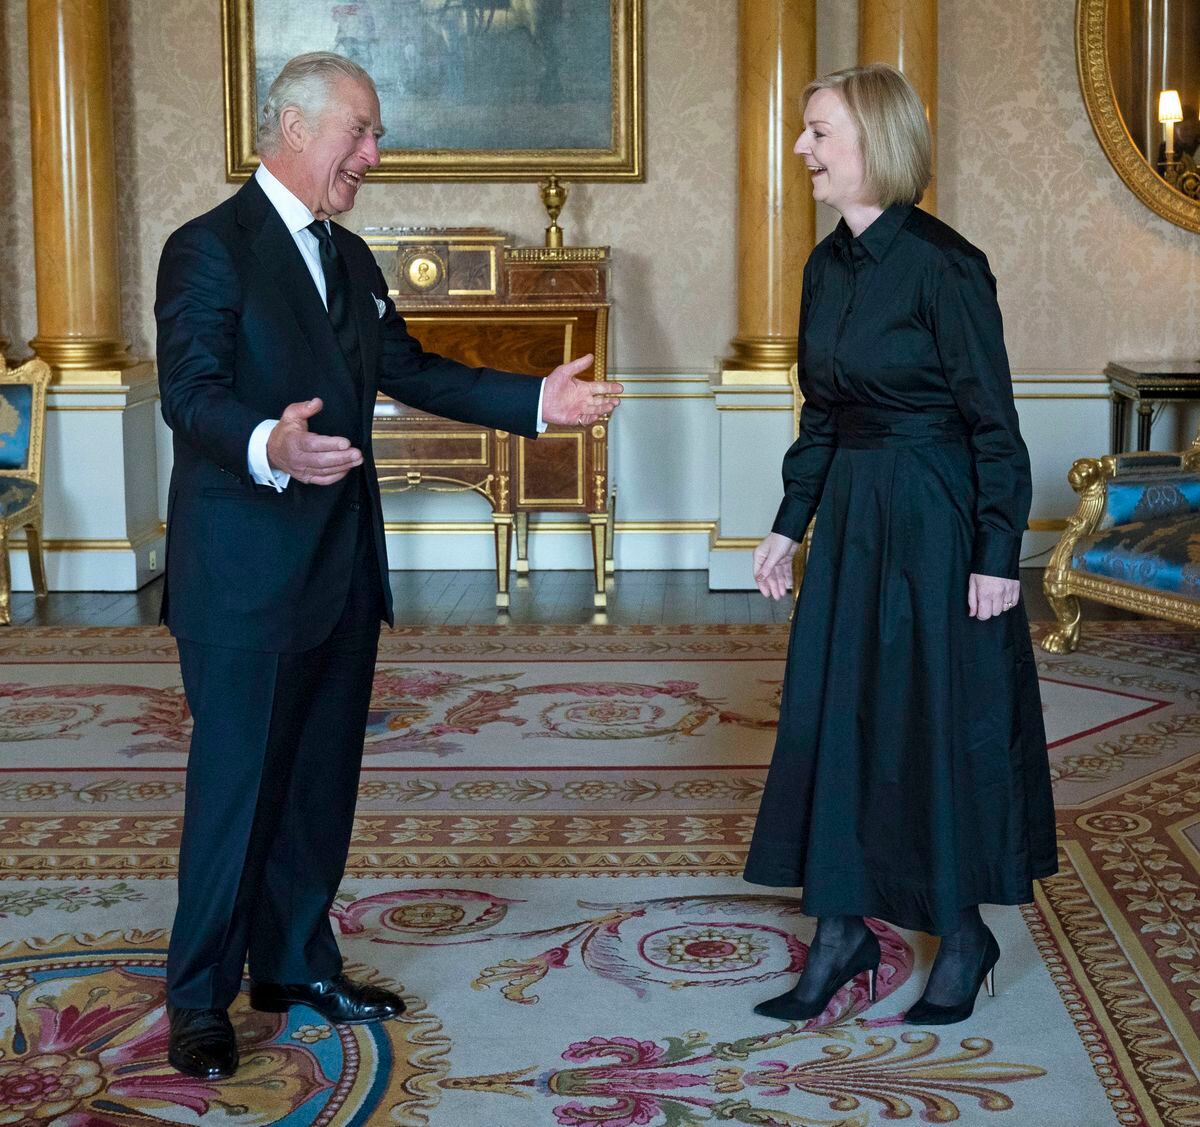 King Charles III receives Prime Minister Liz Truss in the 1844 Room at Buckingham Palace in London